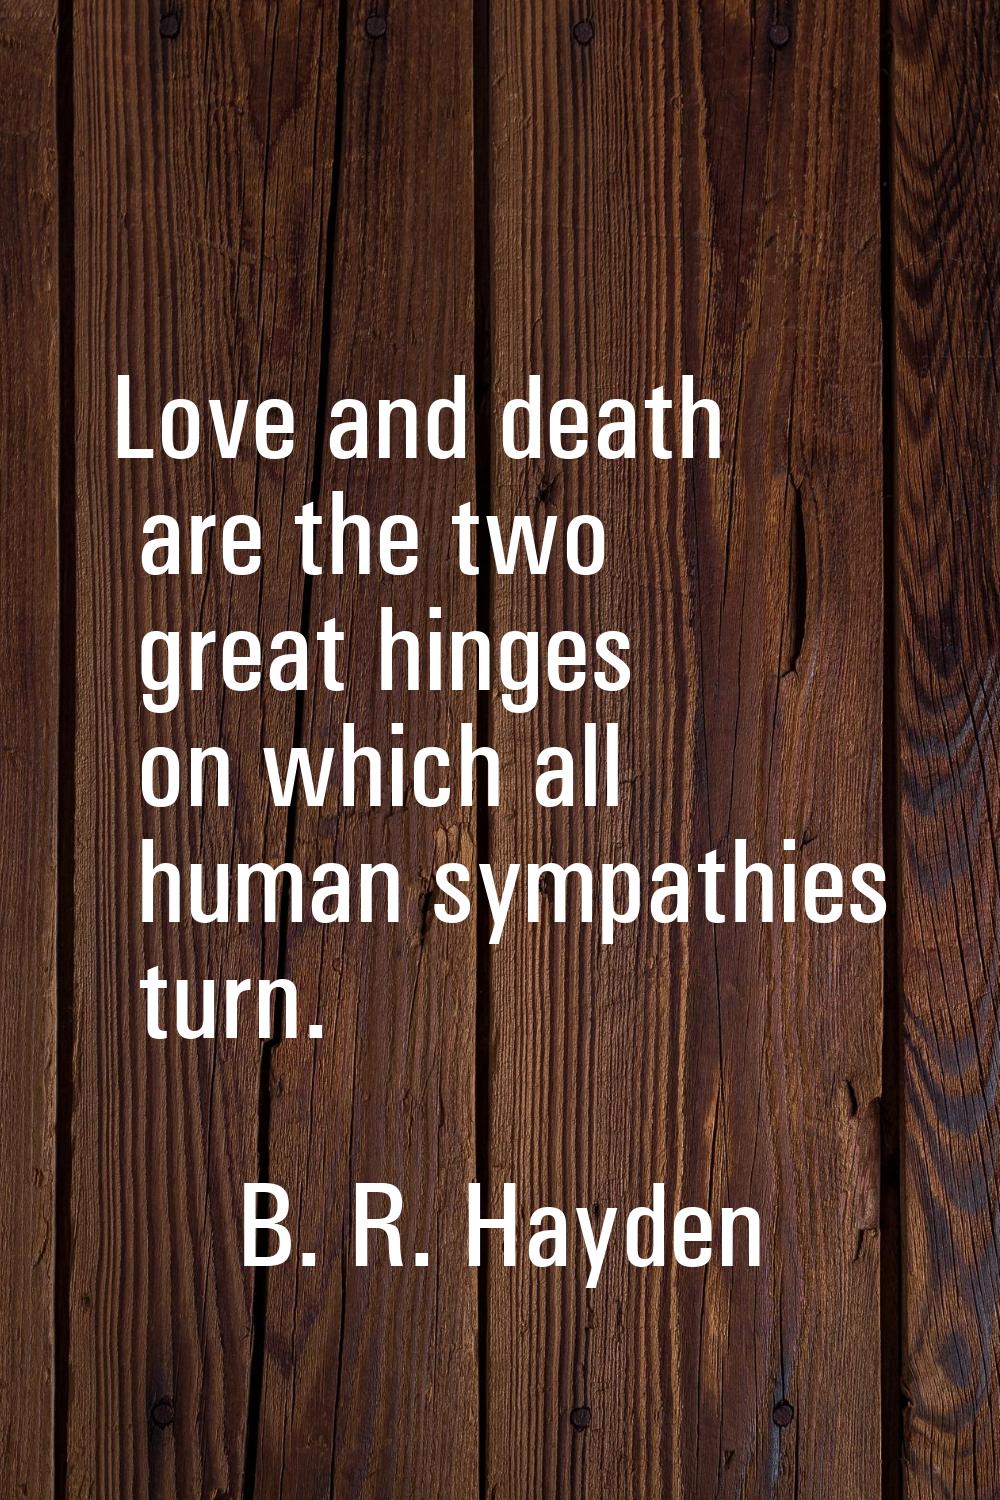 Love and death are the two great hinges on which all human sympathies turn.